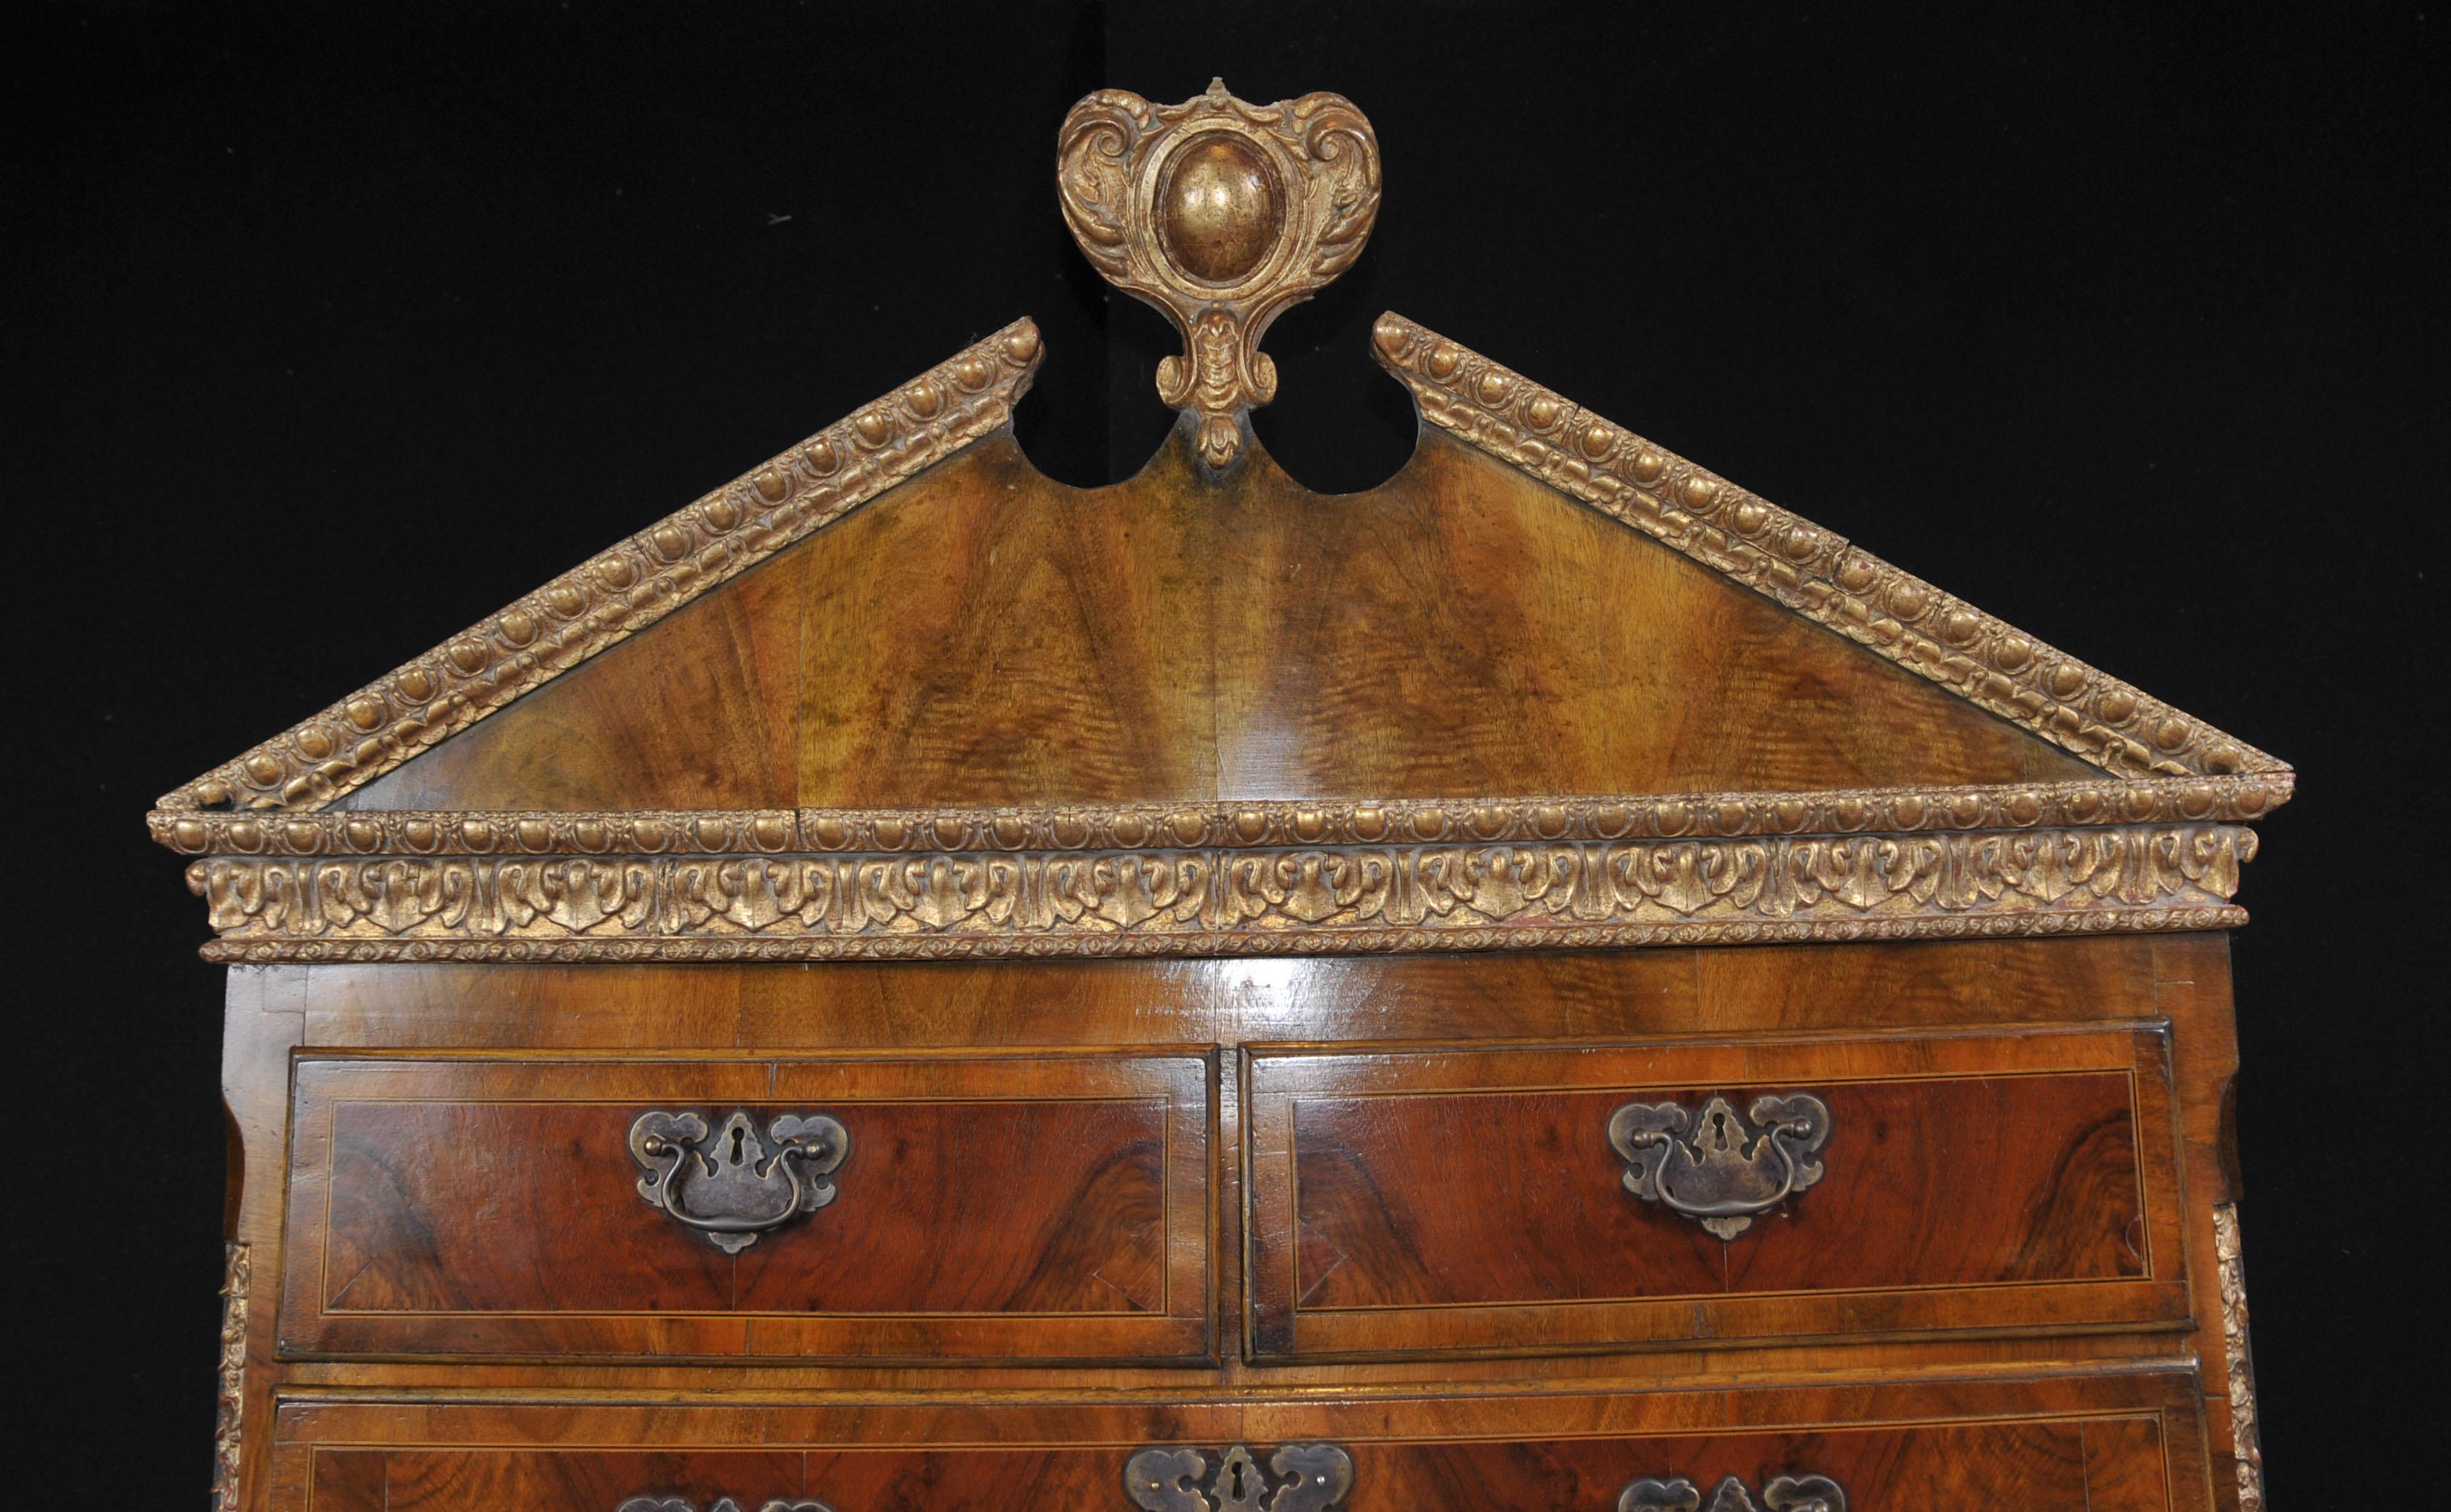 Woodwork Impressive Sized English Burl Walnut Chest on Chest Dating to 1840 Standing For Sale